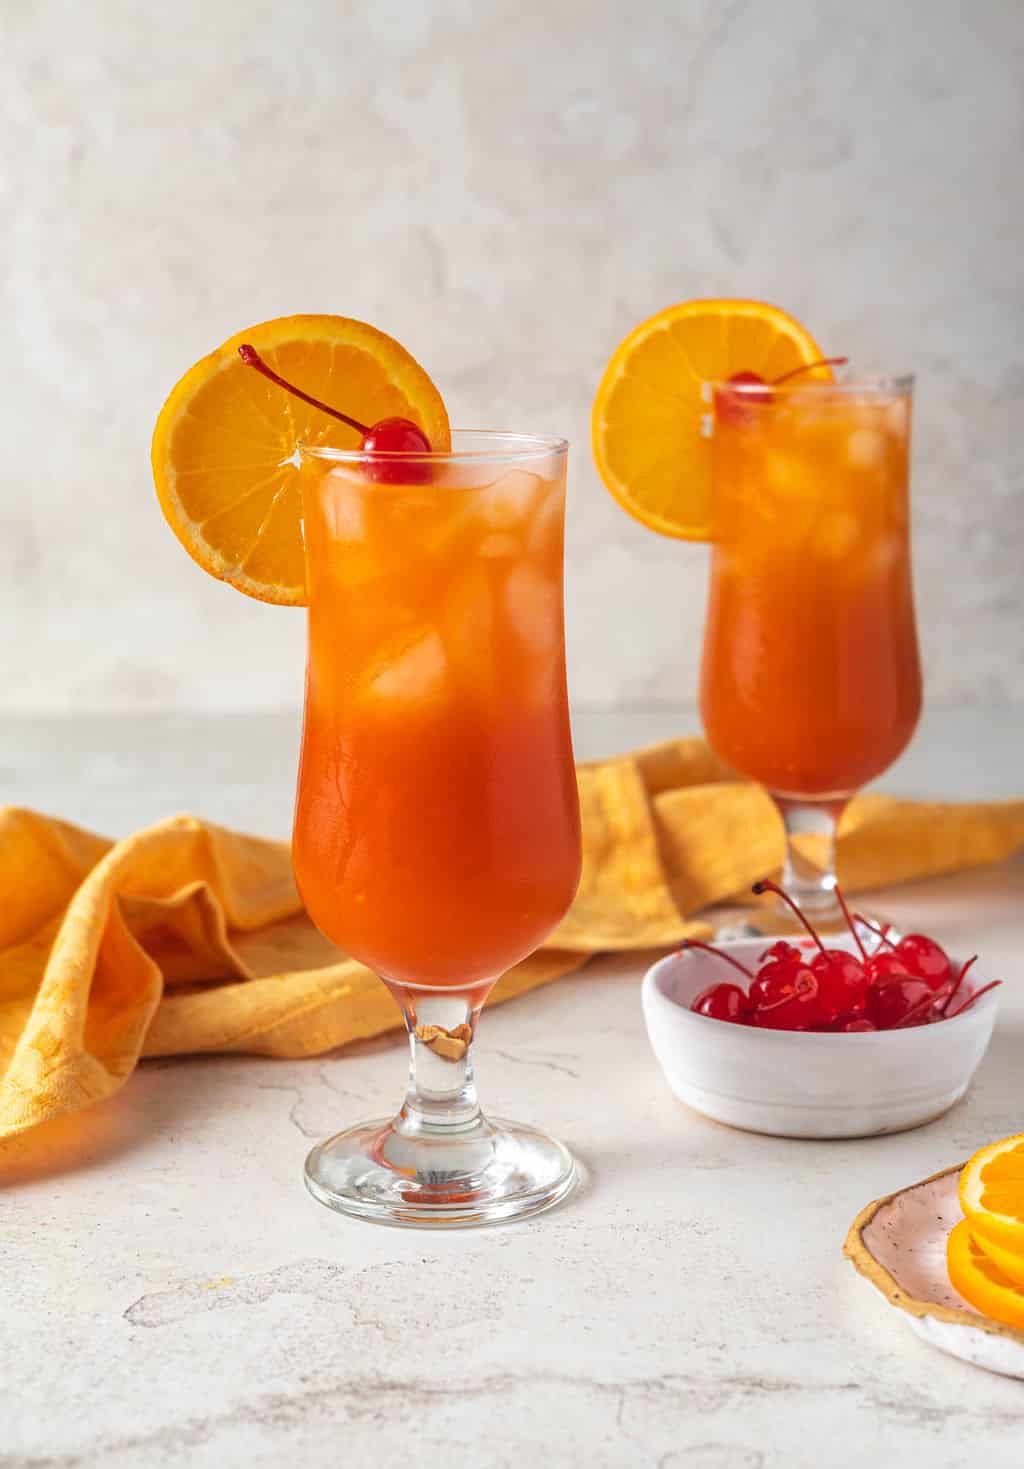 Hurricane cocktail on table with orange and cherries.